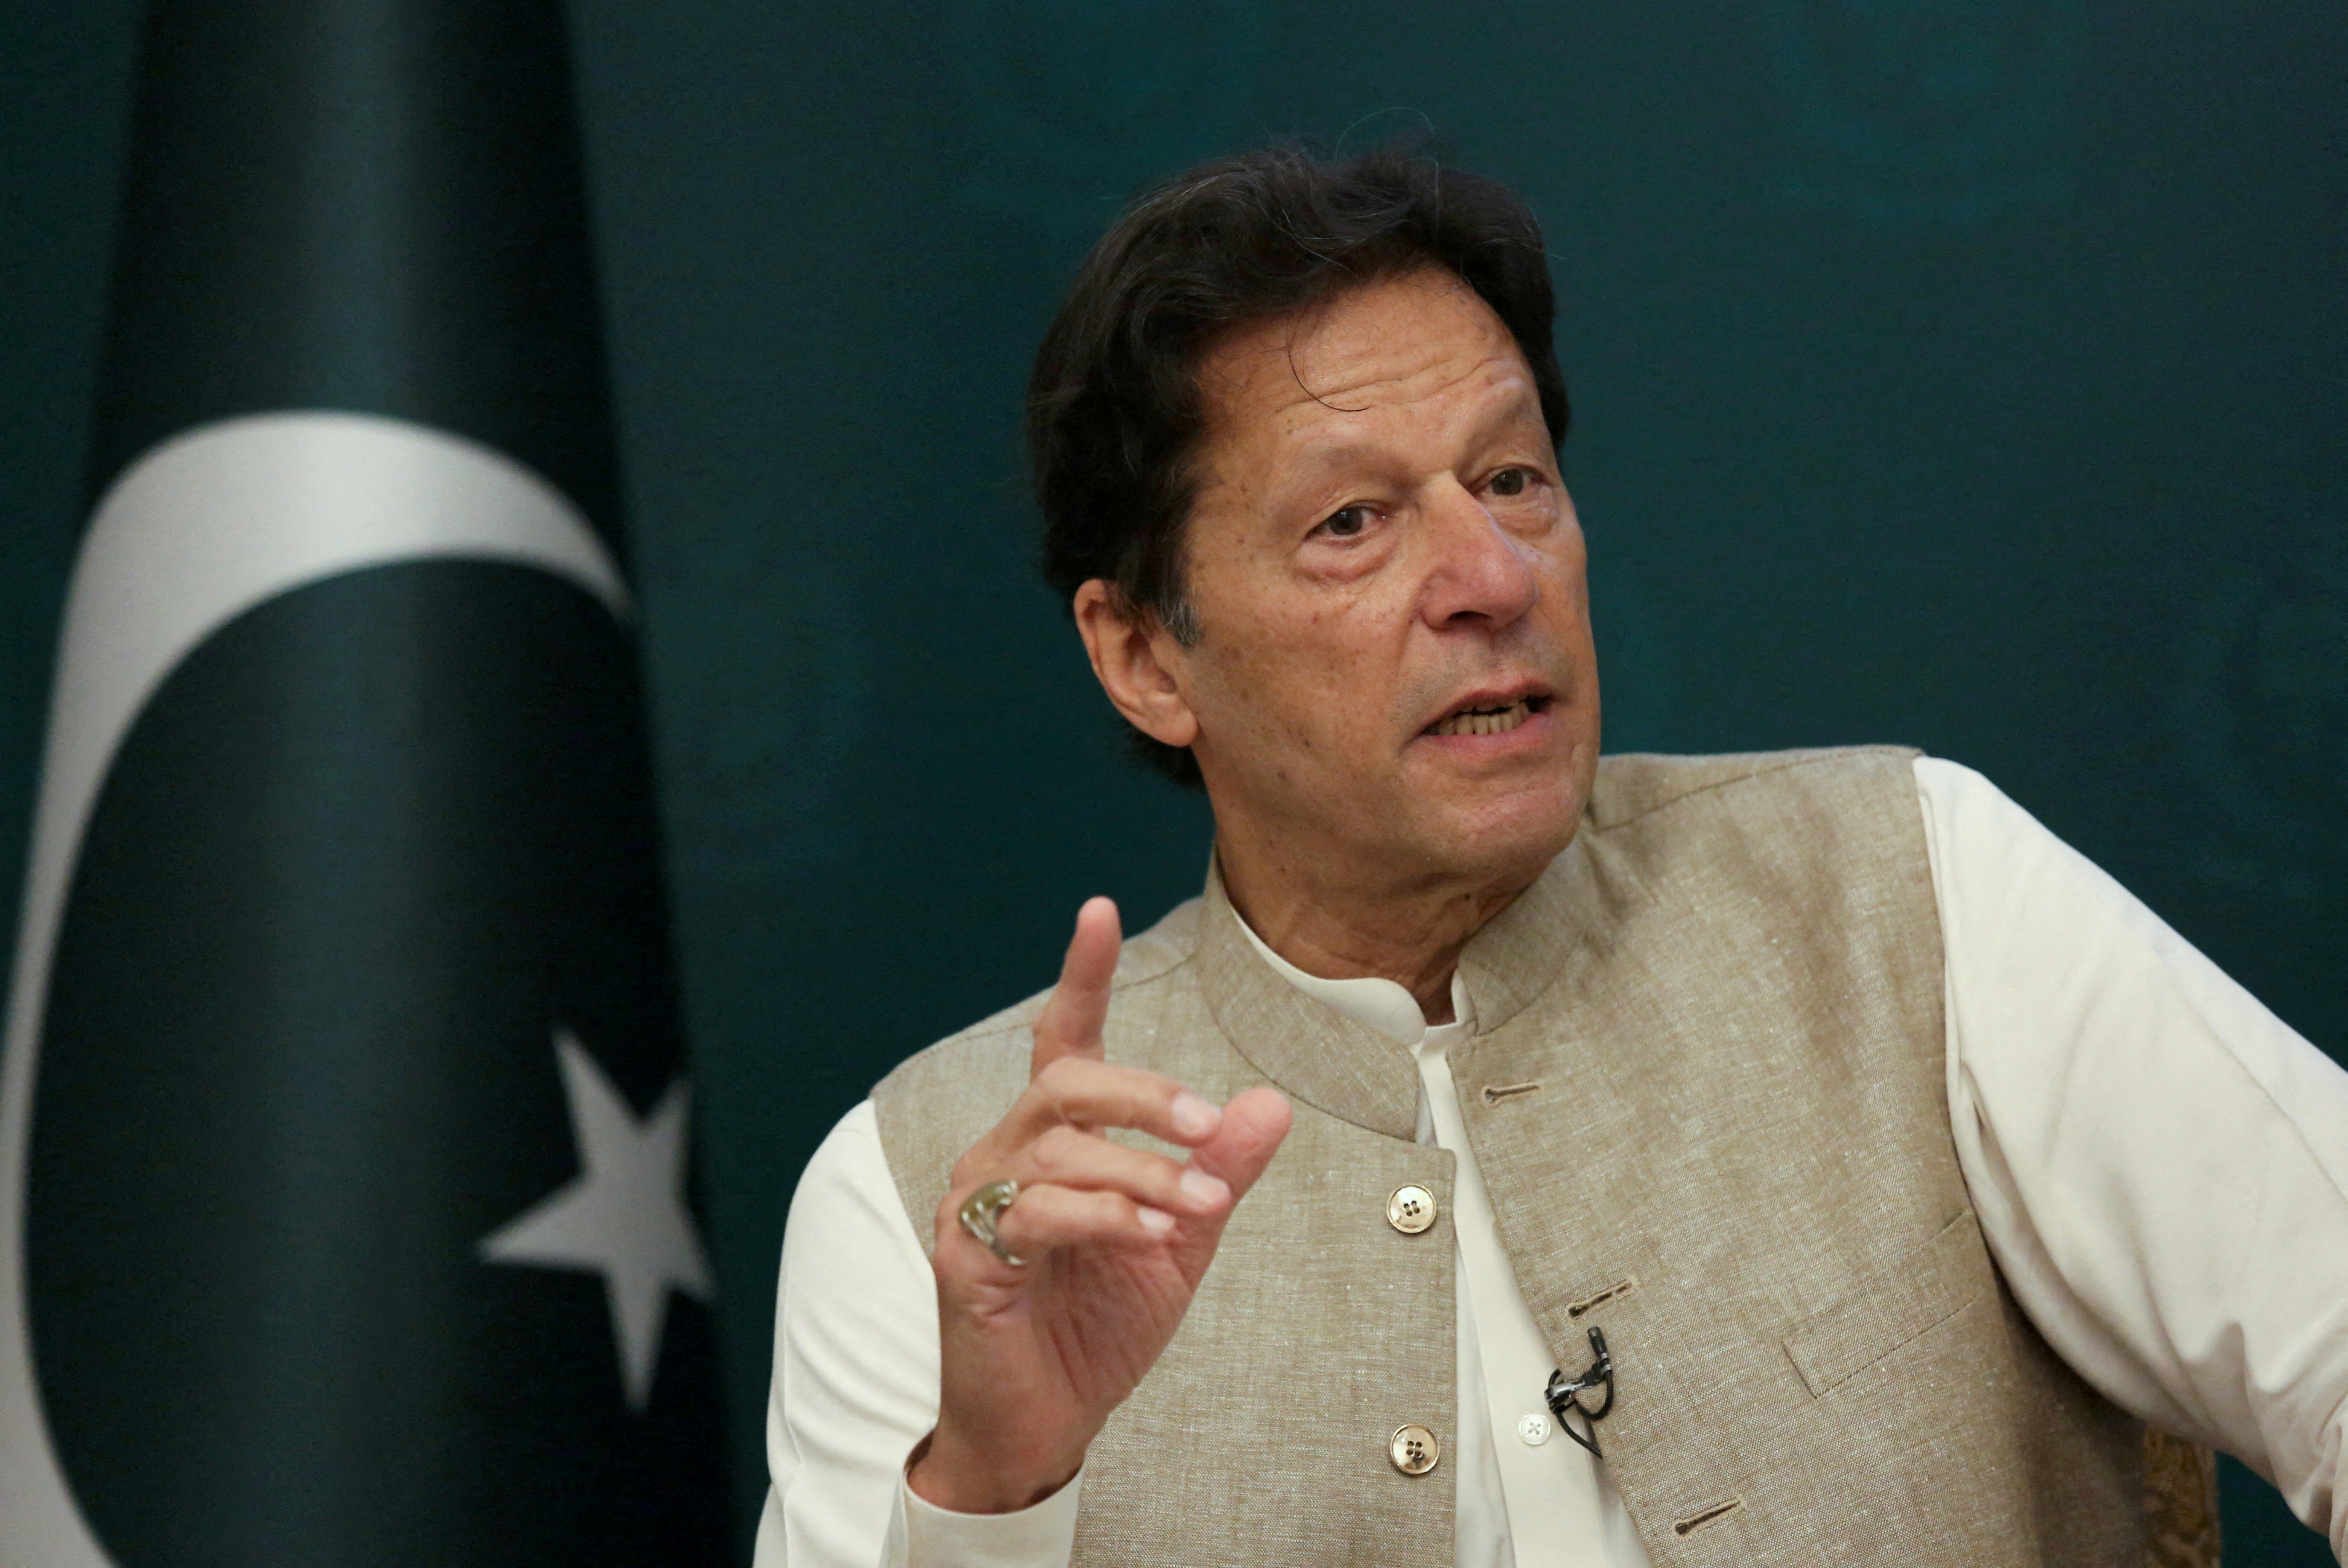 Pakistani Prime Minister Imran Khan speaks during an interview with Reuters in Islamabad